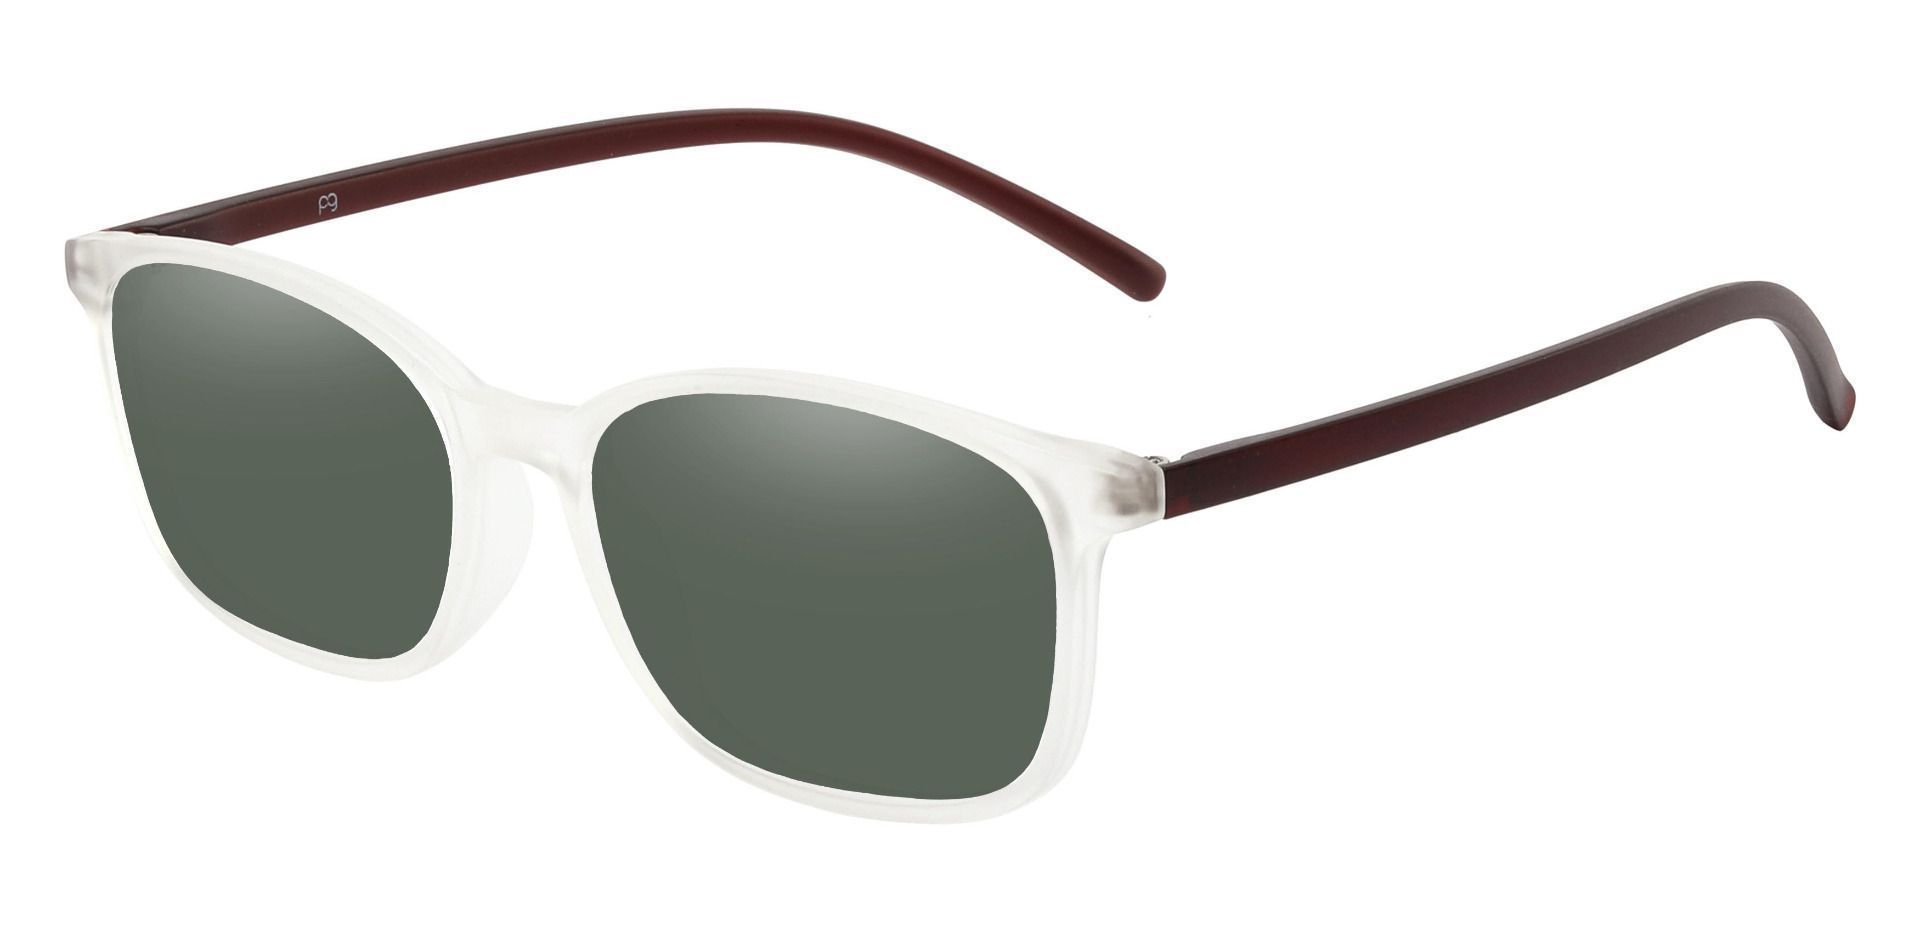 Onyx Square Progressive Sunglasses - Clear Frame With Green Lenses